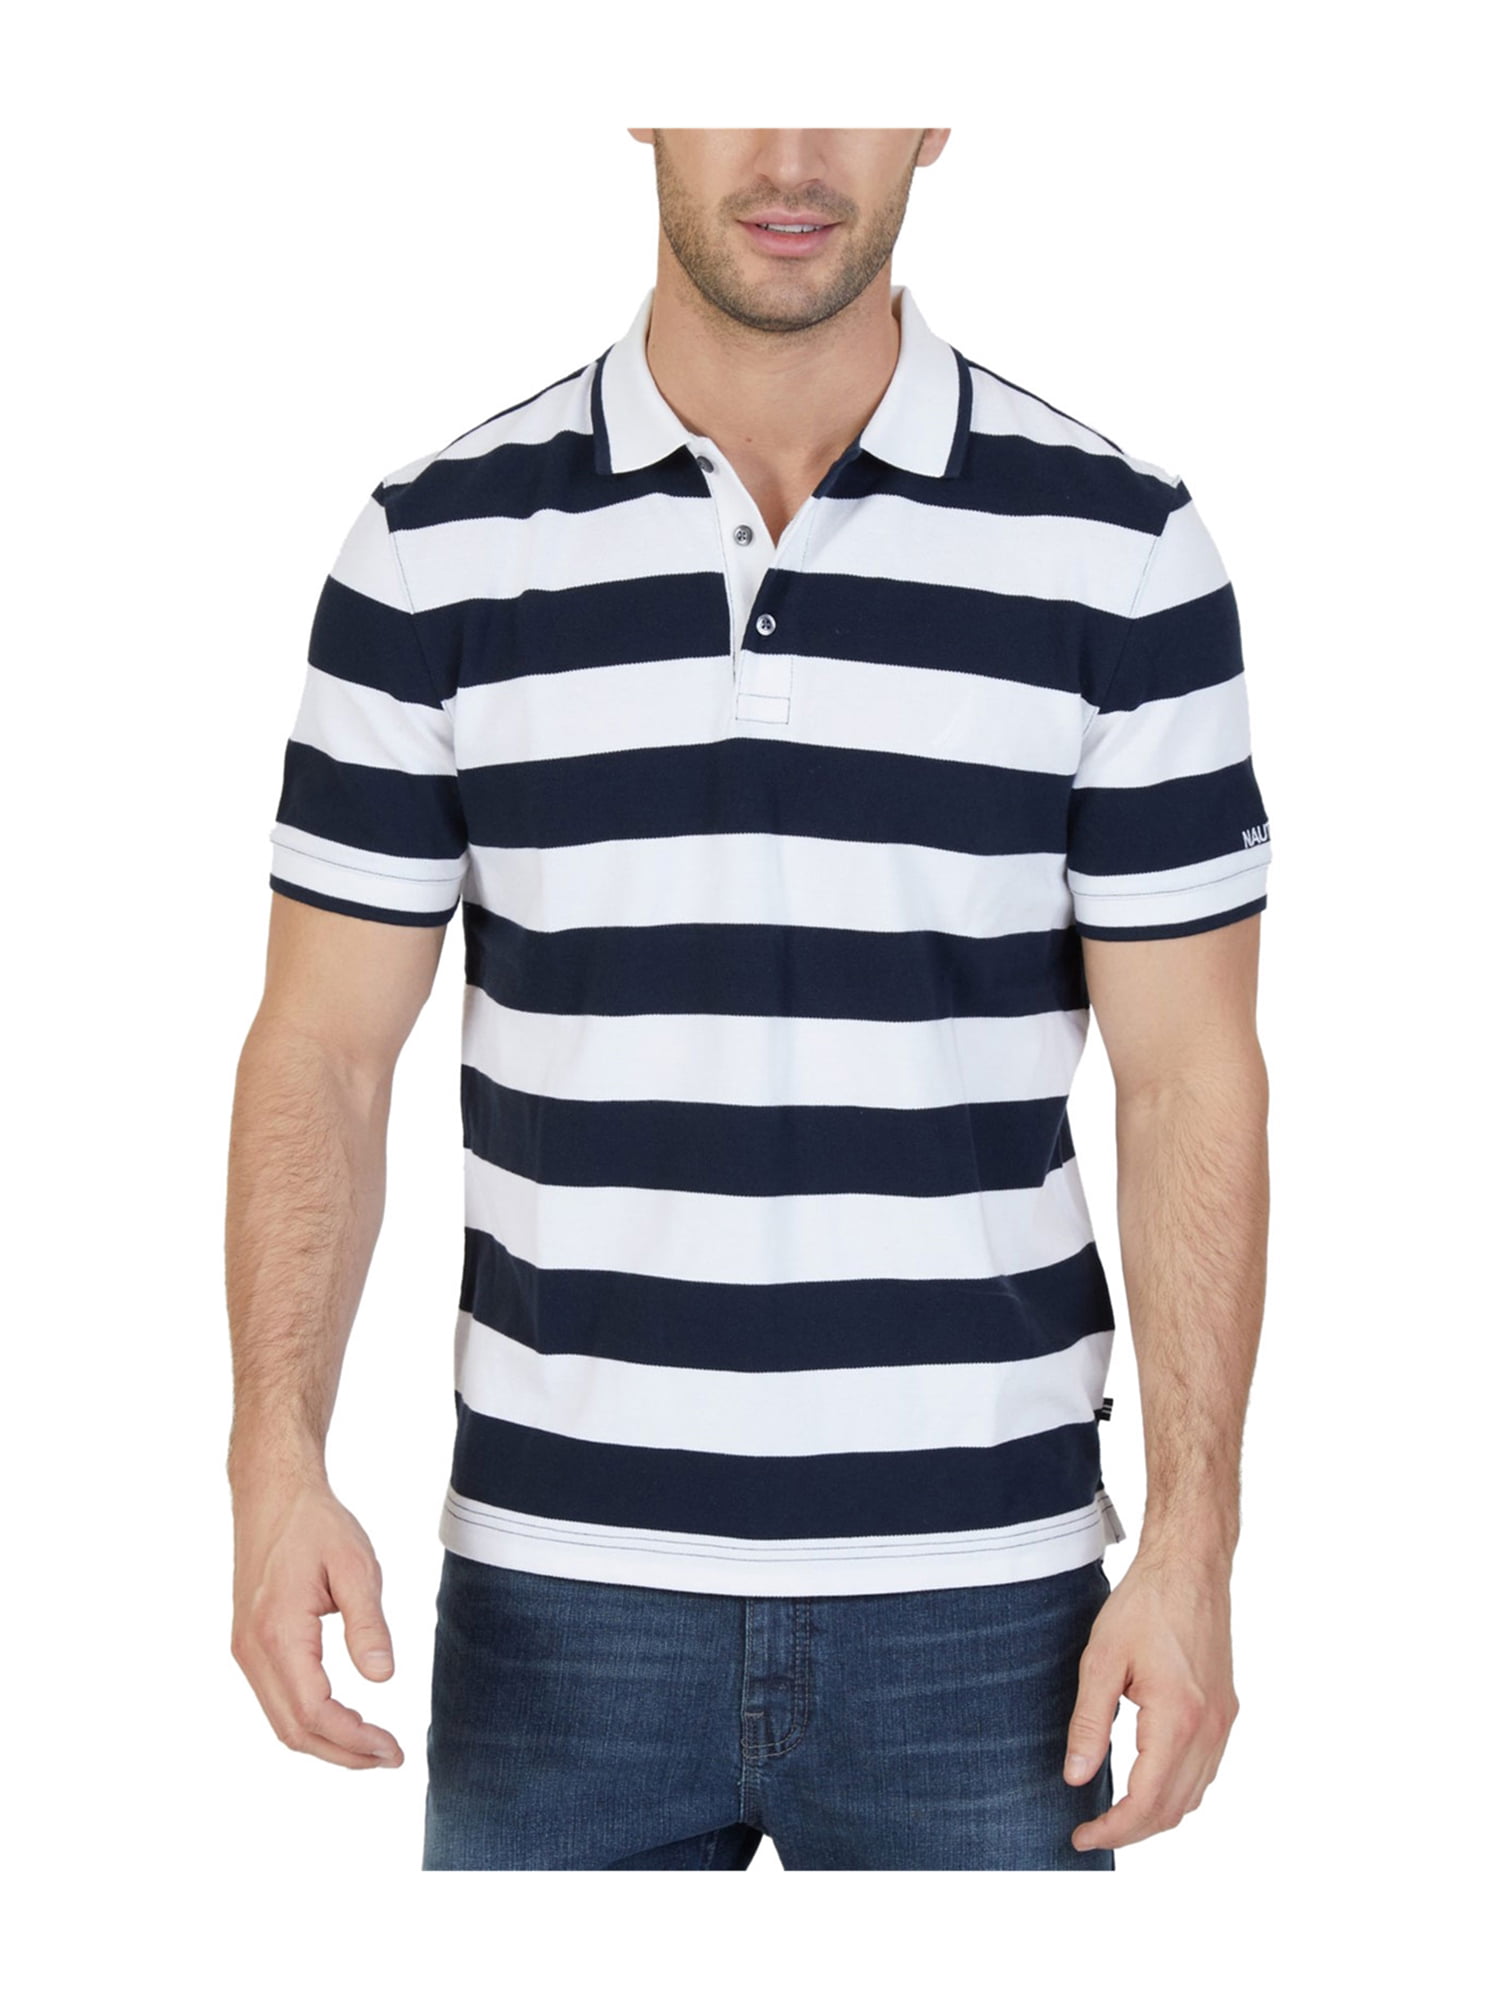 Nautica Boys Active Short Sleeve Performance Embossed Striped Polo 